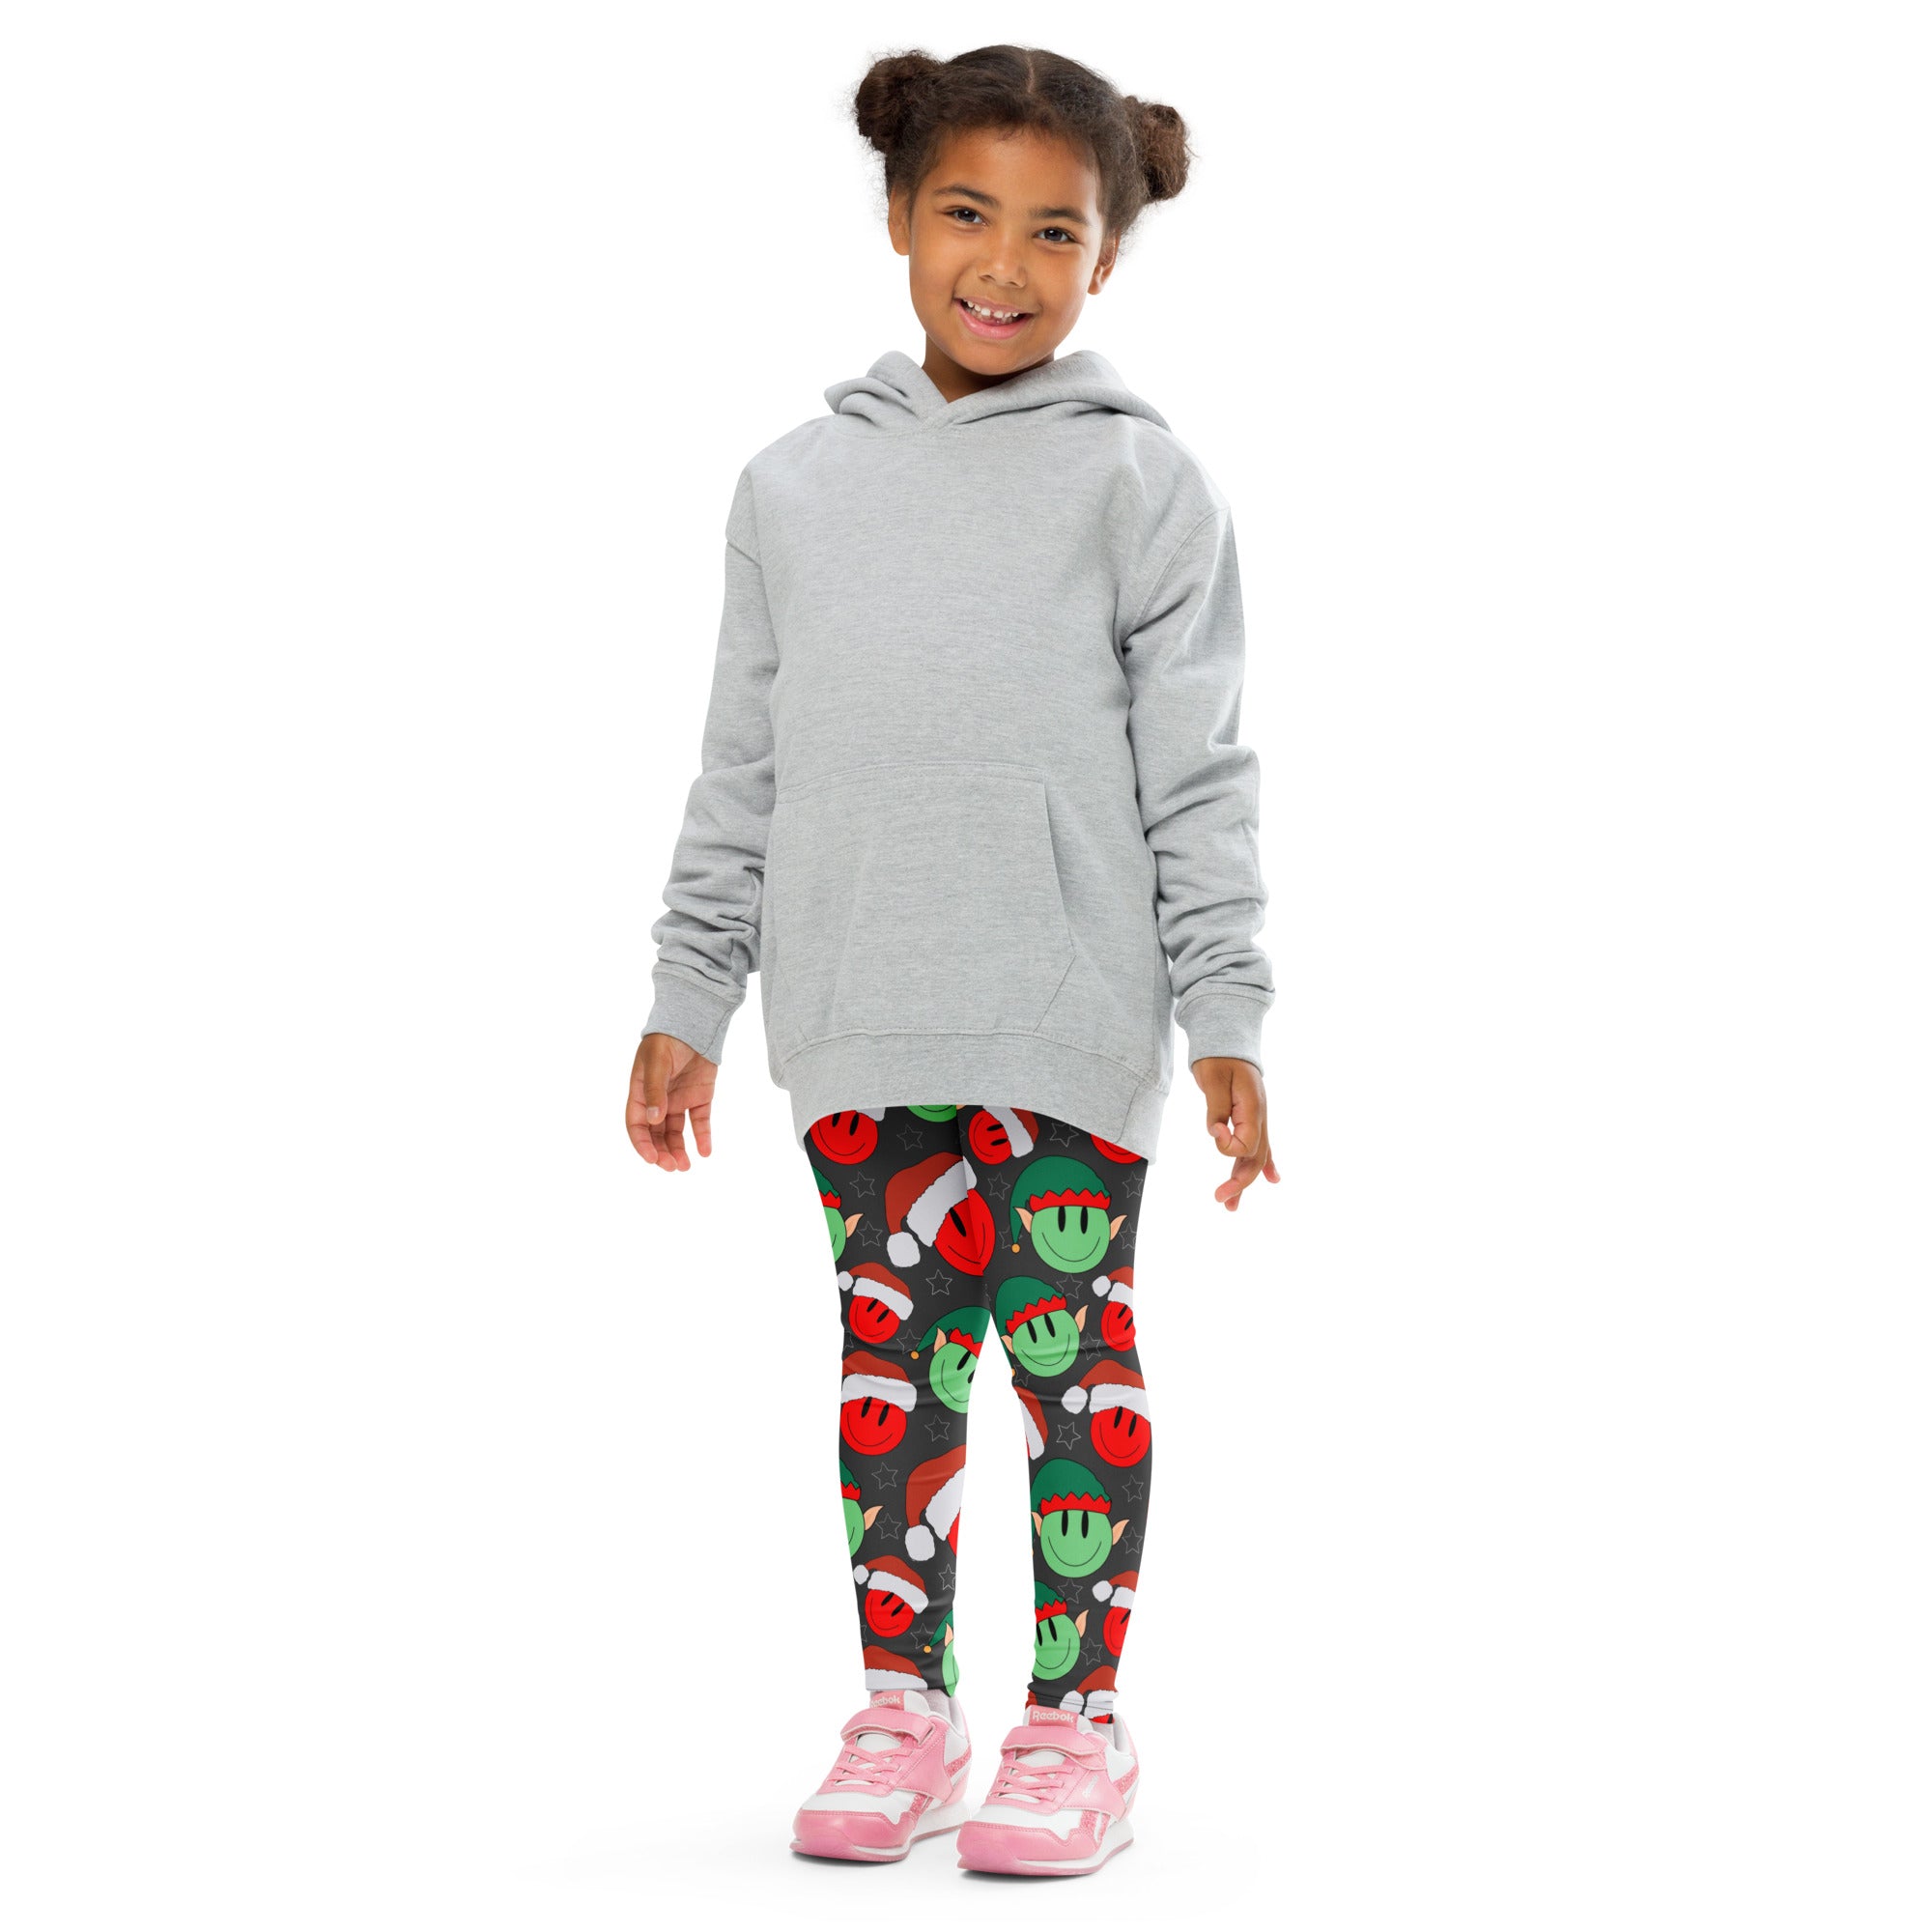 Elves And Smiley Faces Kid's Leggings